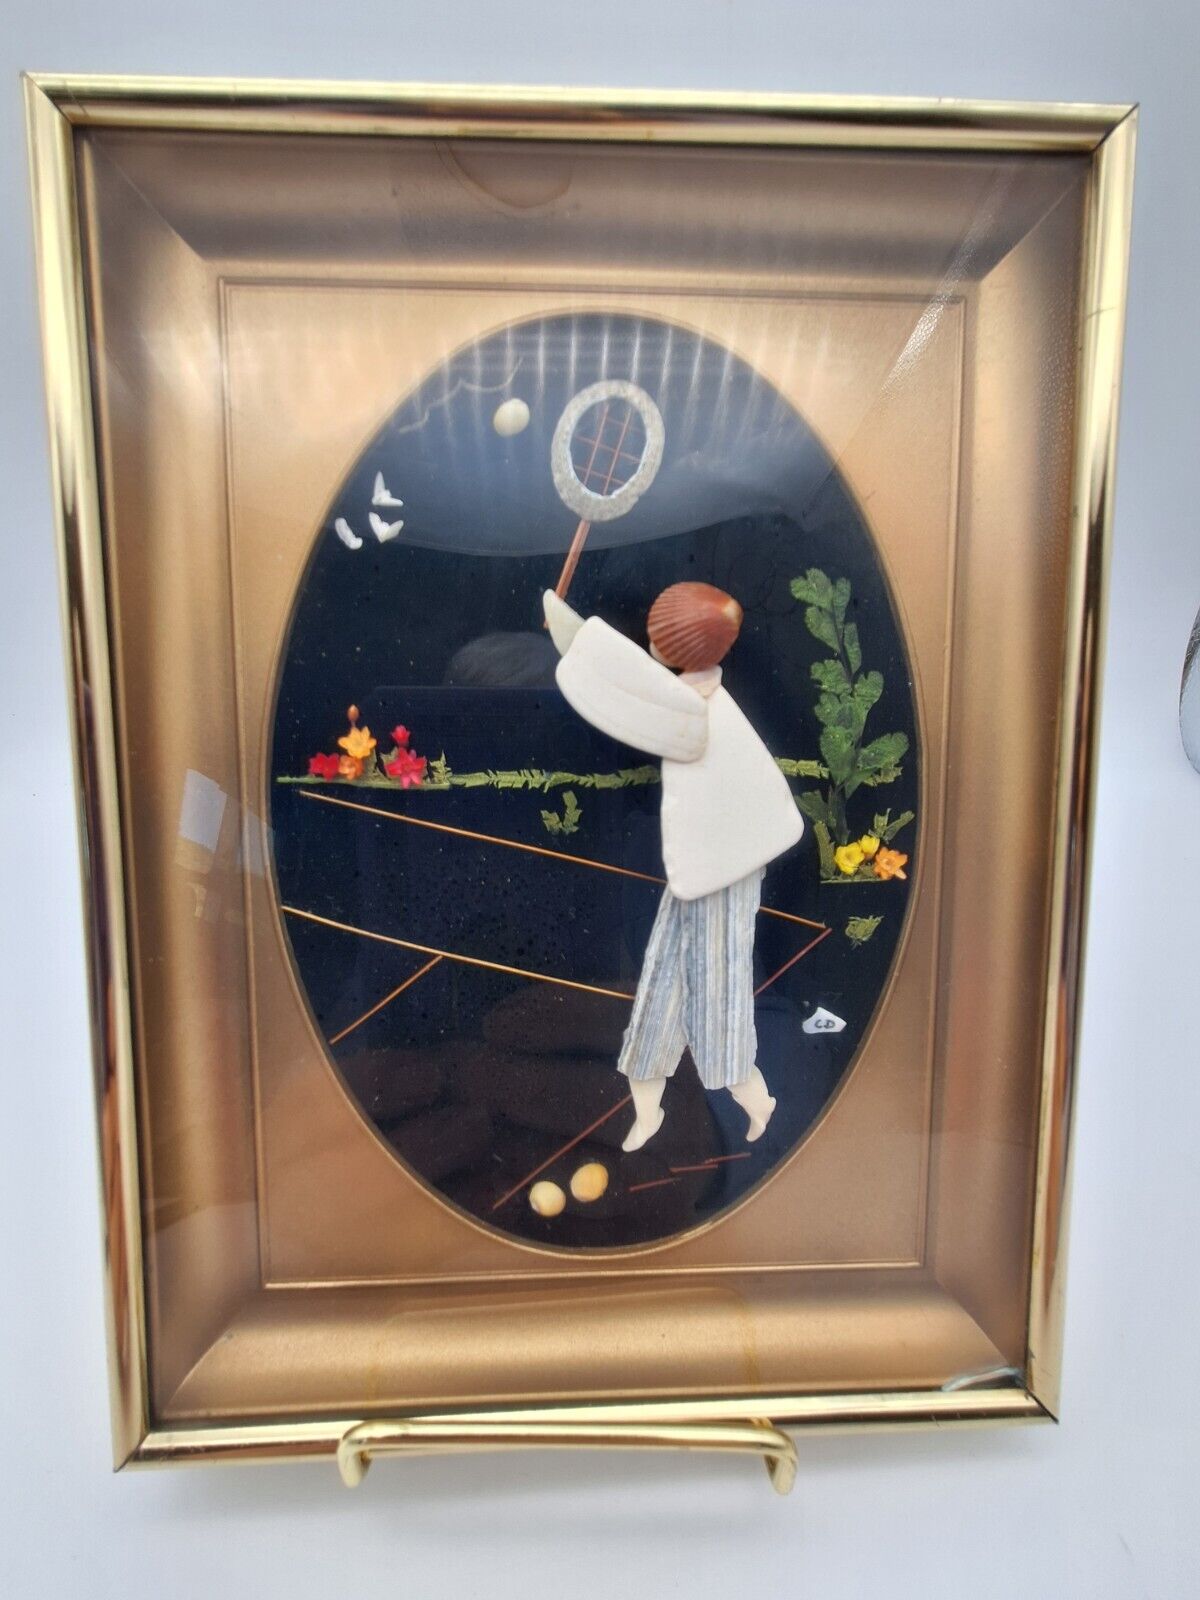 Shell Figurine Tennis Player Picture Framed 1985 Unique 6 x 8 inches